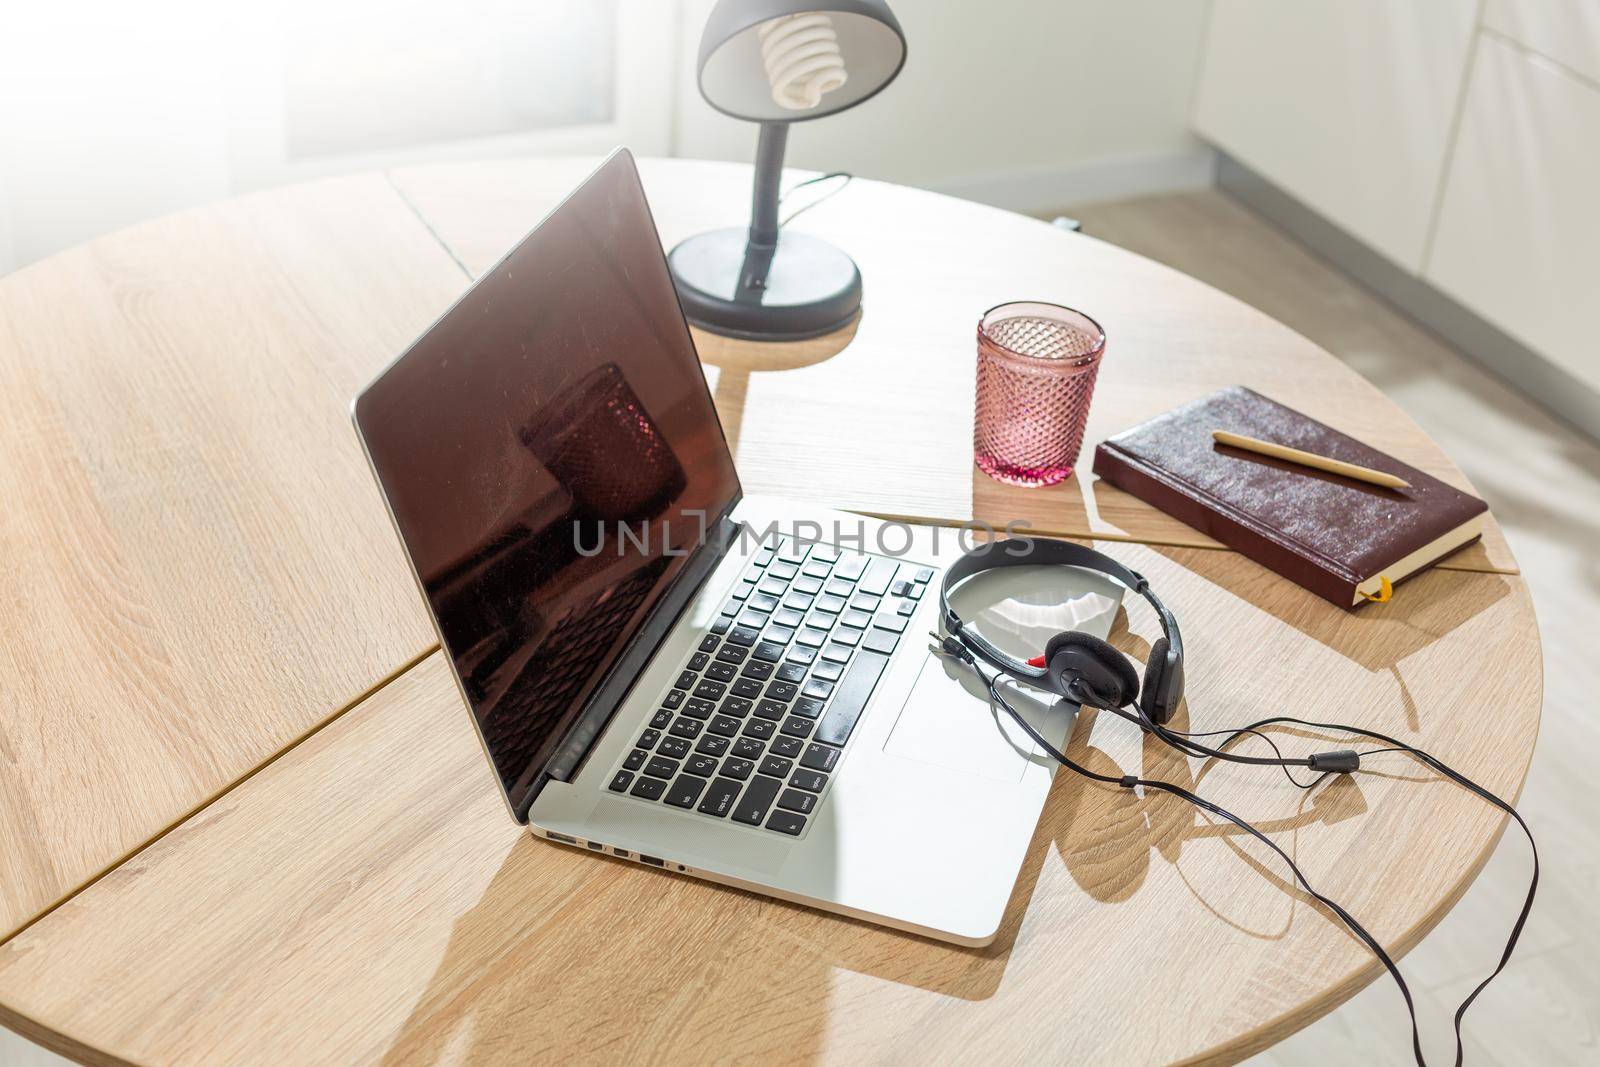 Laptop on table, home interior.